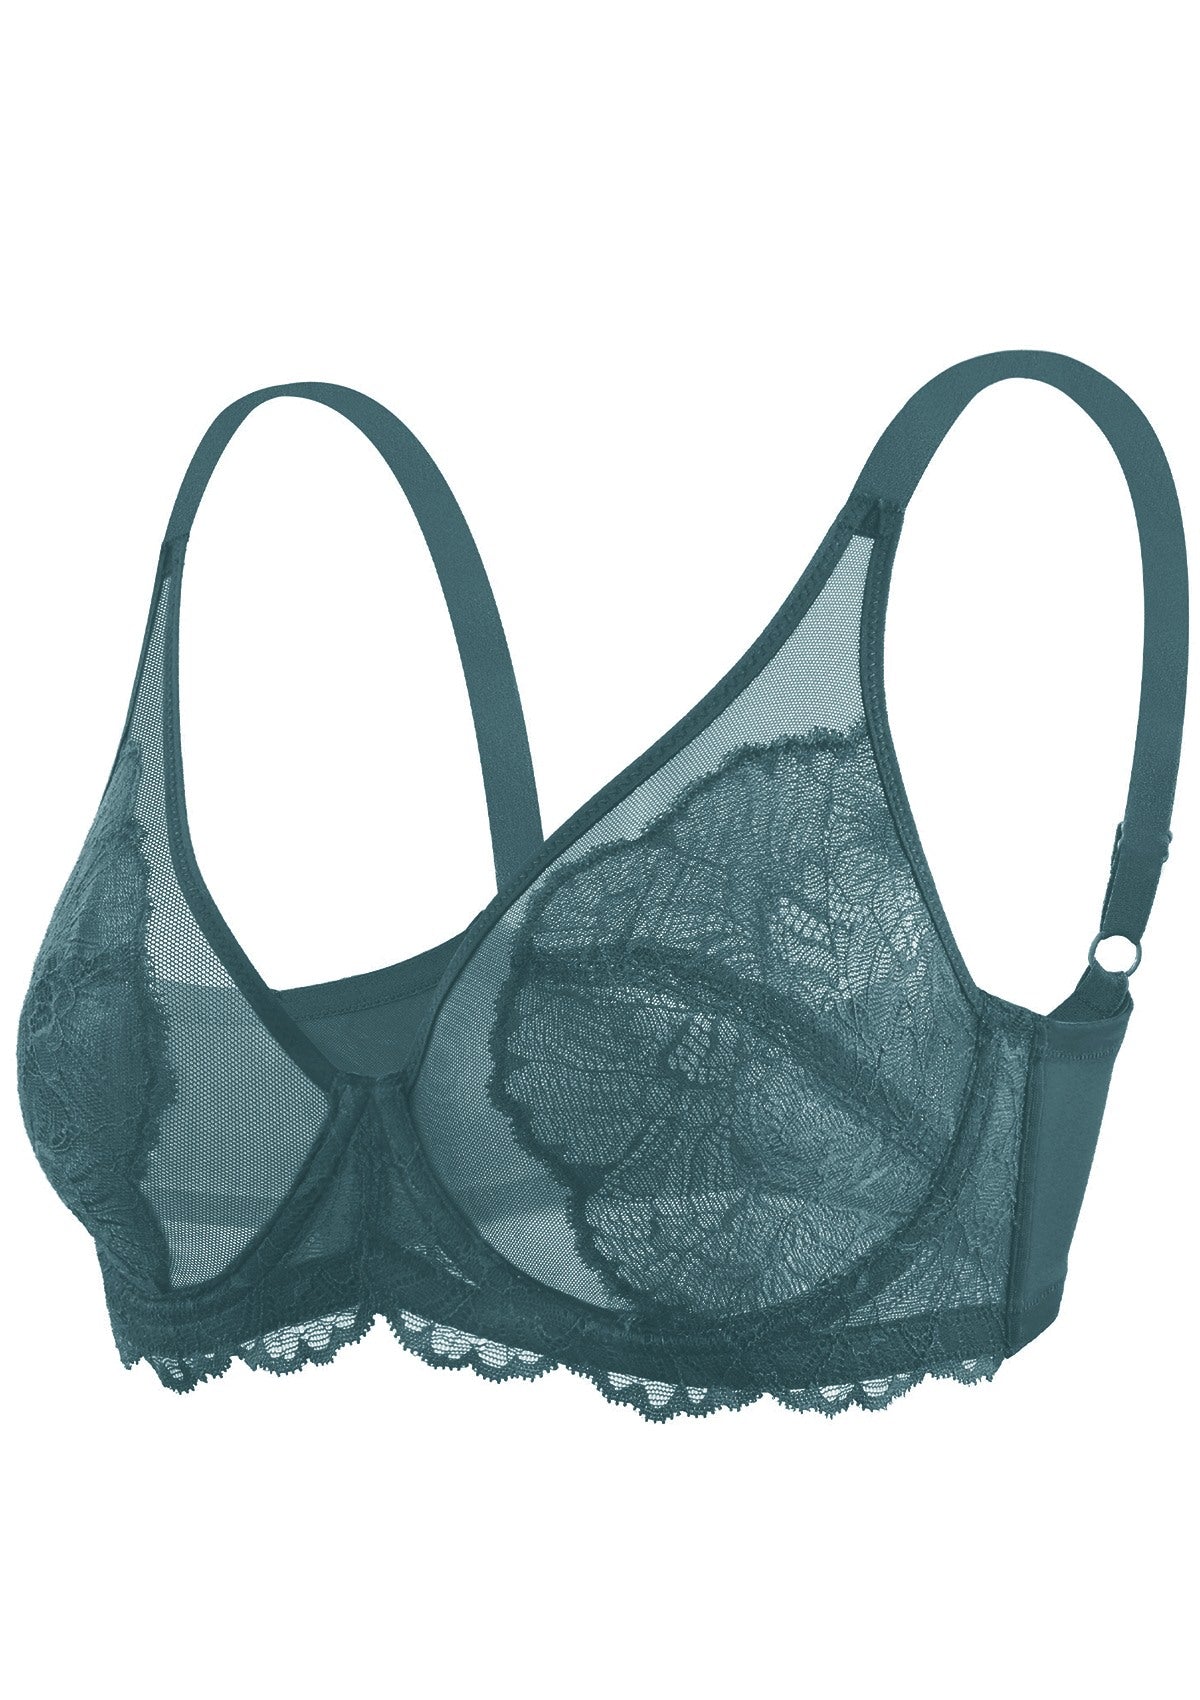 HSIA Blossom Full Figure See-Through Lace Bra For Side And Back Fat - Biscay Blue / 38 / C